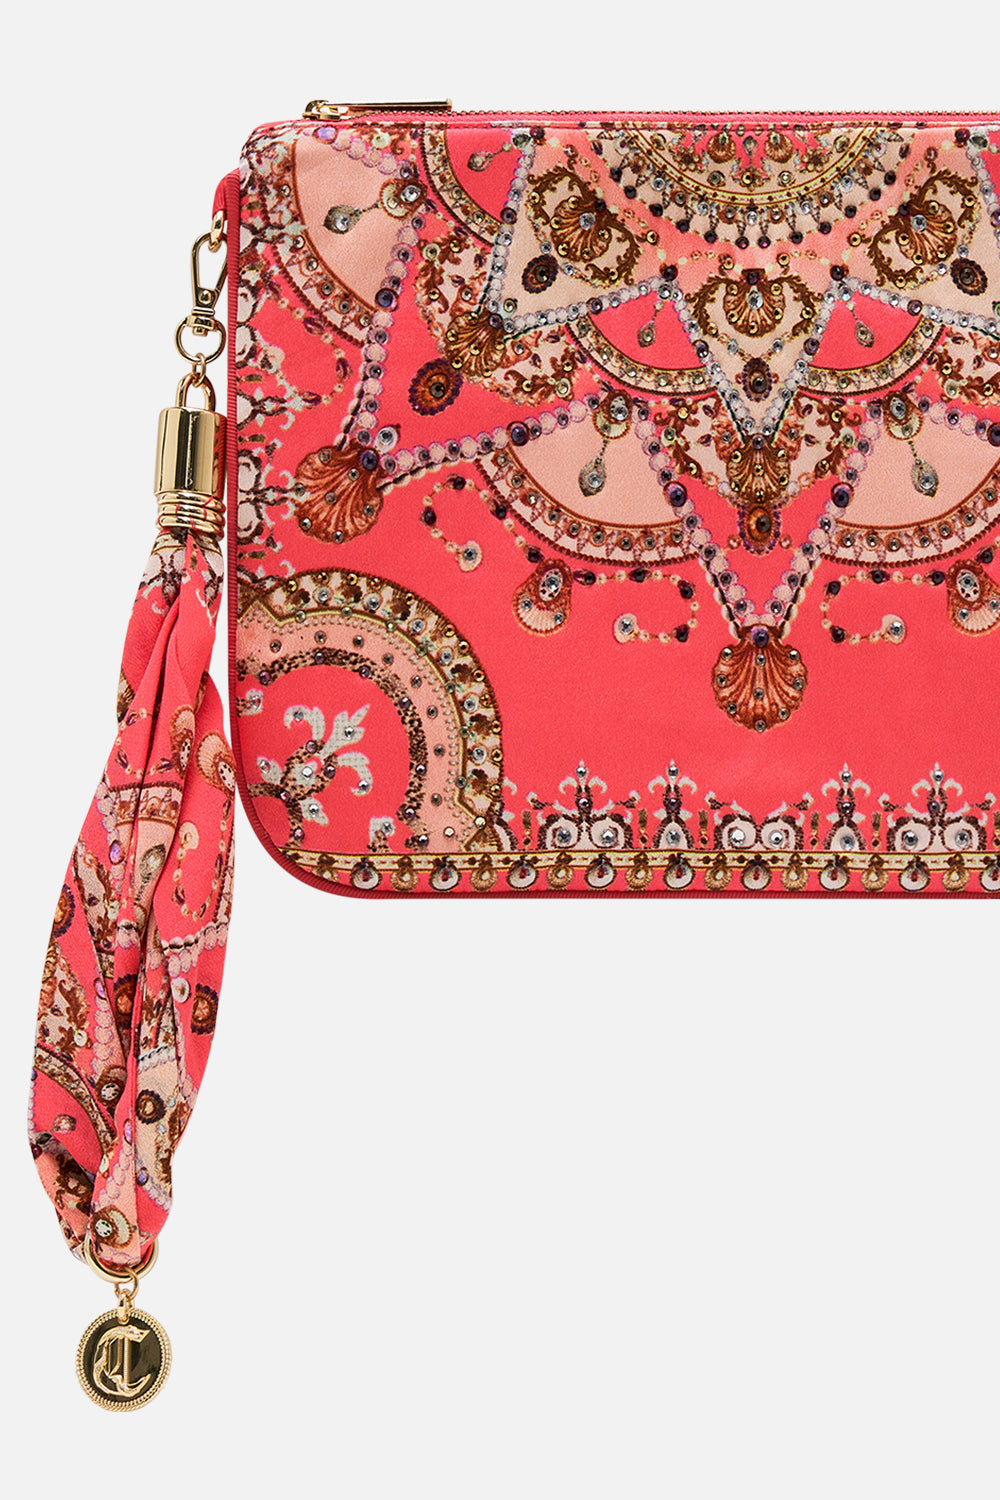 CAMILLA pink scarf clutch in Shell Games